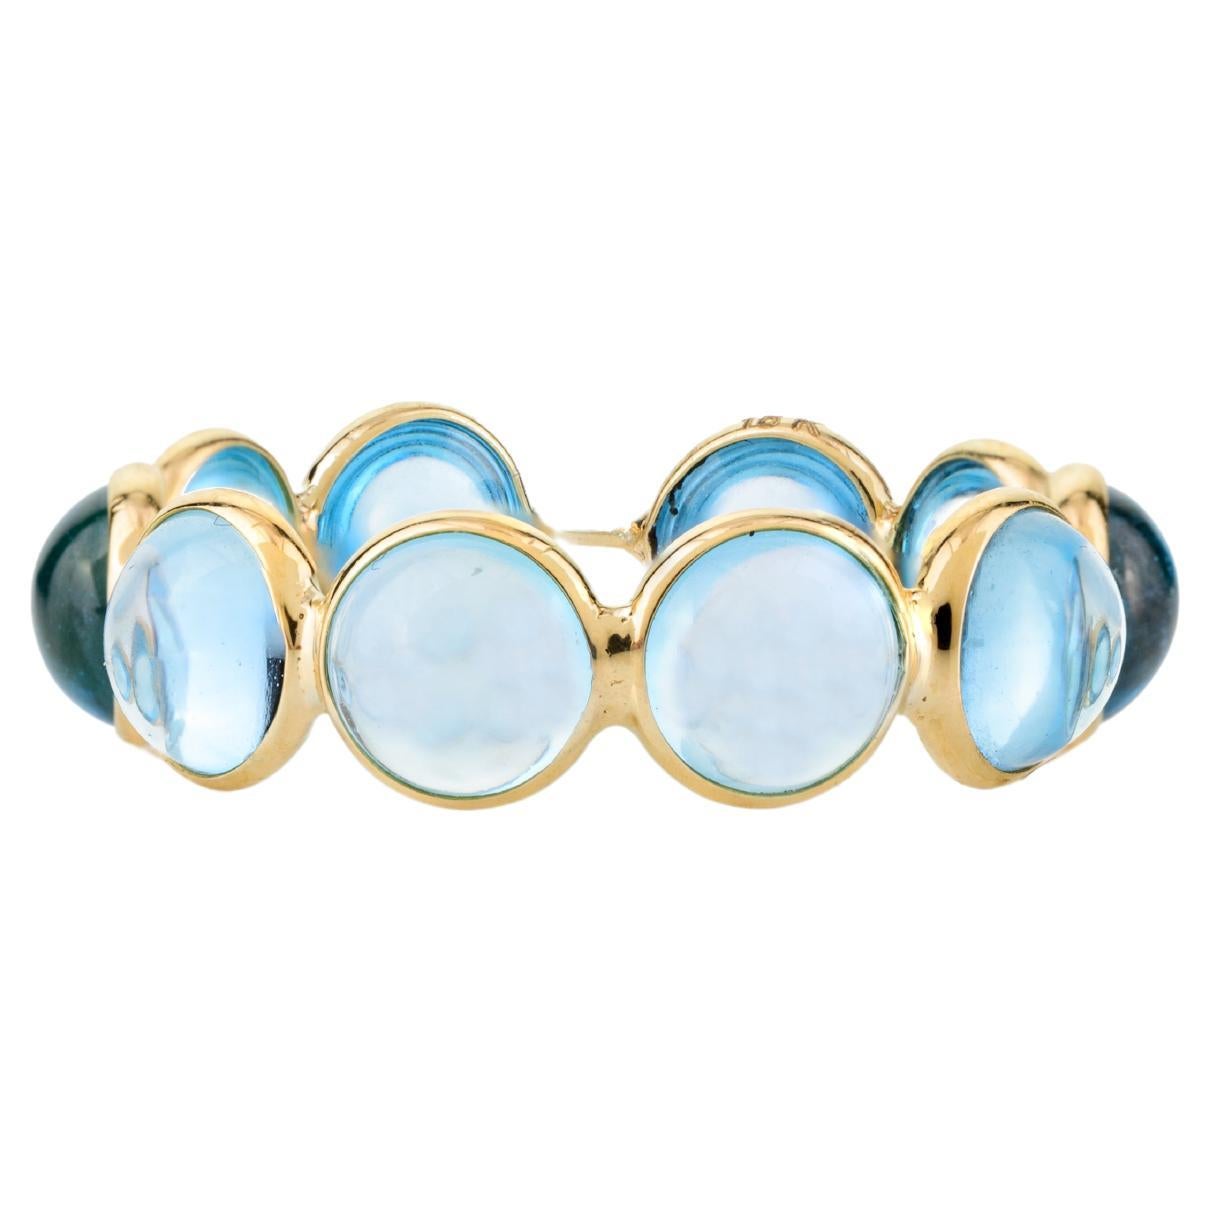 For Sale:  Round Cabochon Blue Topaz Eternity Band Ring Gift in 18k Solid Yellow Gold